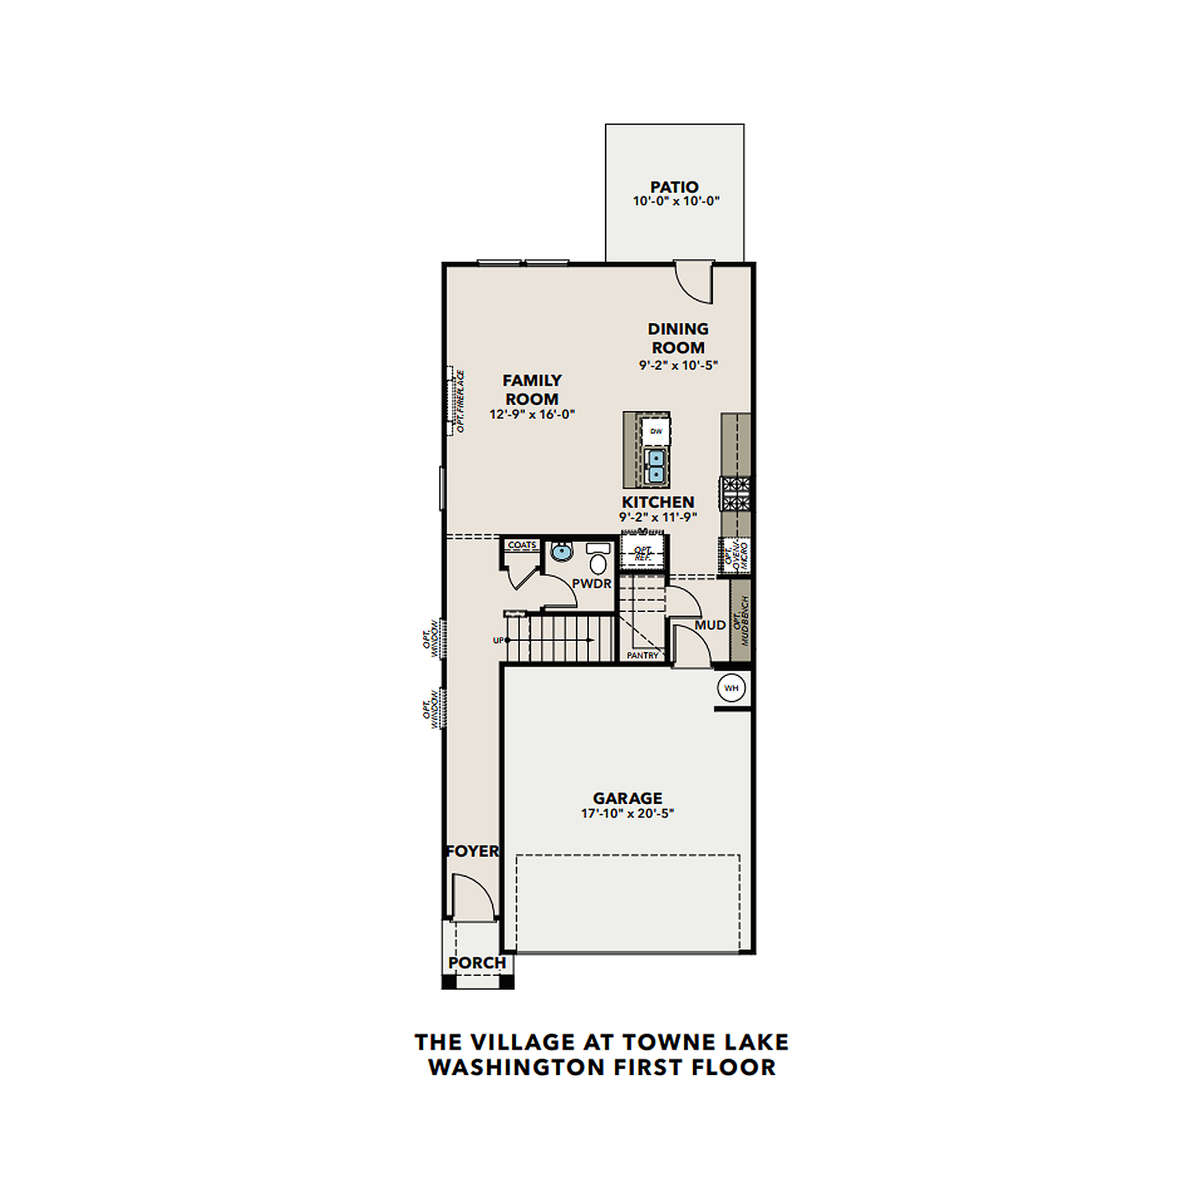 1 - The Washington F buildable floor plan layout in Davidson Homes' The Village at Towne Lake community.